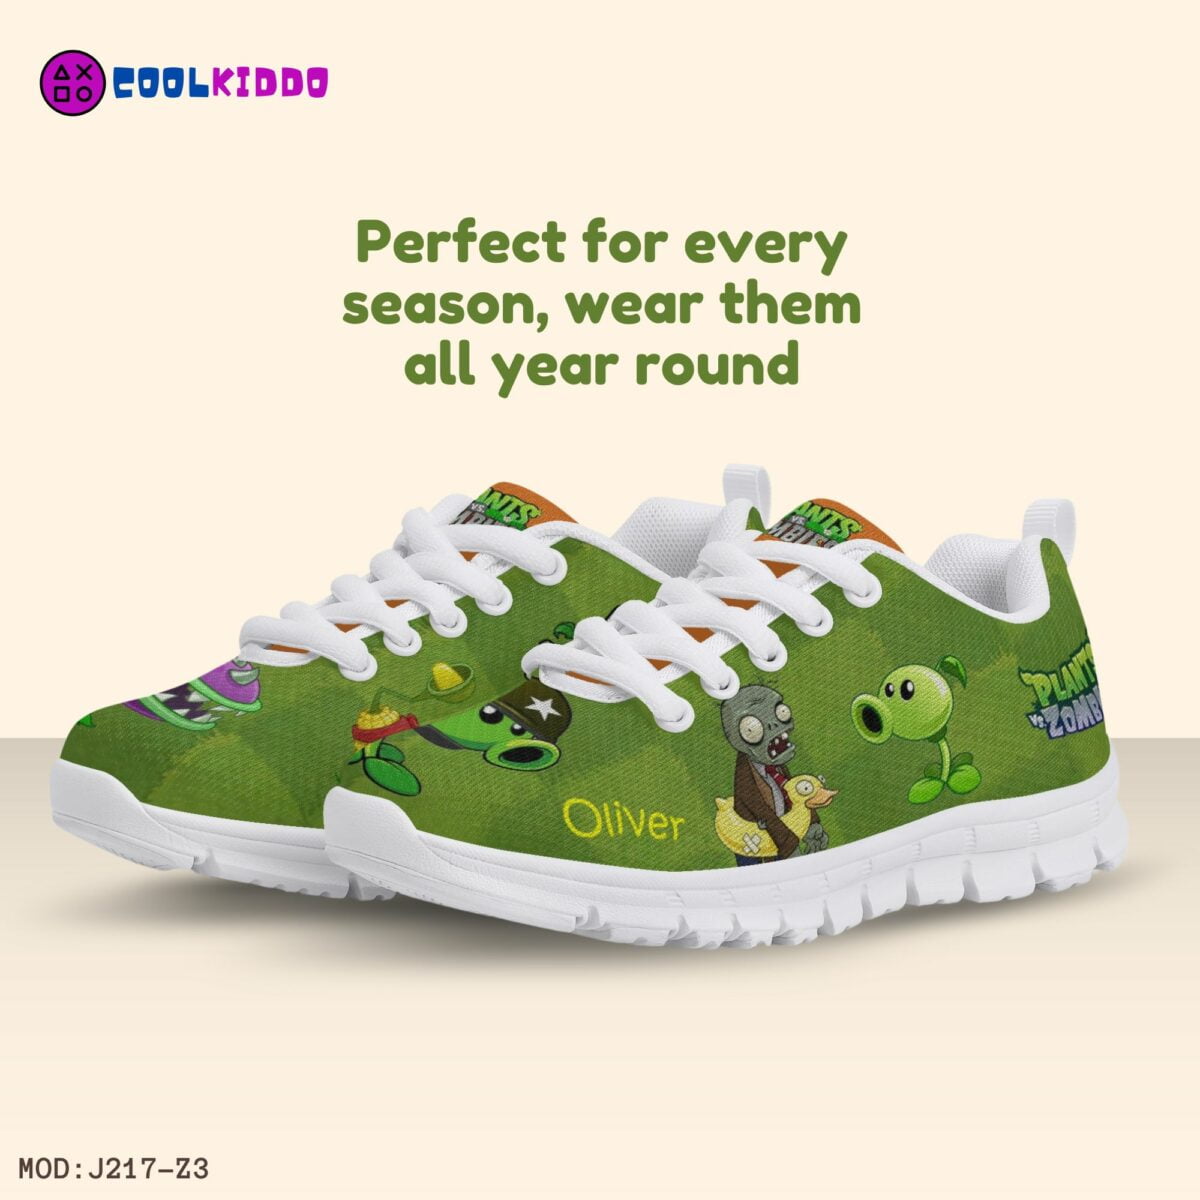 Personalized Plants vs Zombies Inspired Kids’ Lightweight Mesh Sneakers Cool Kiddo 18